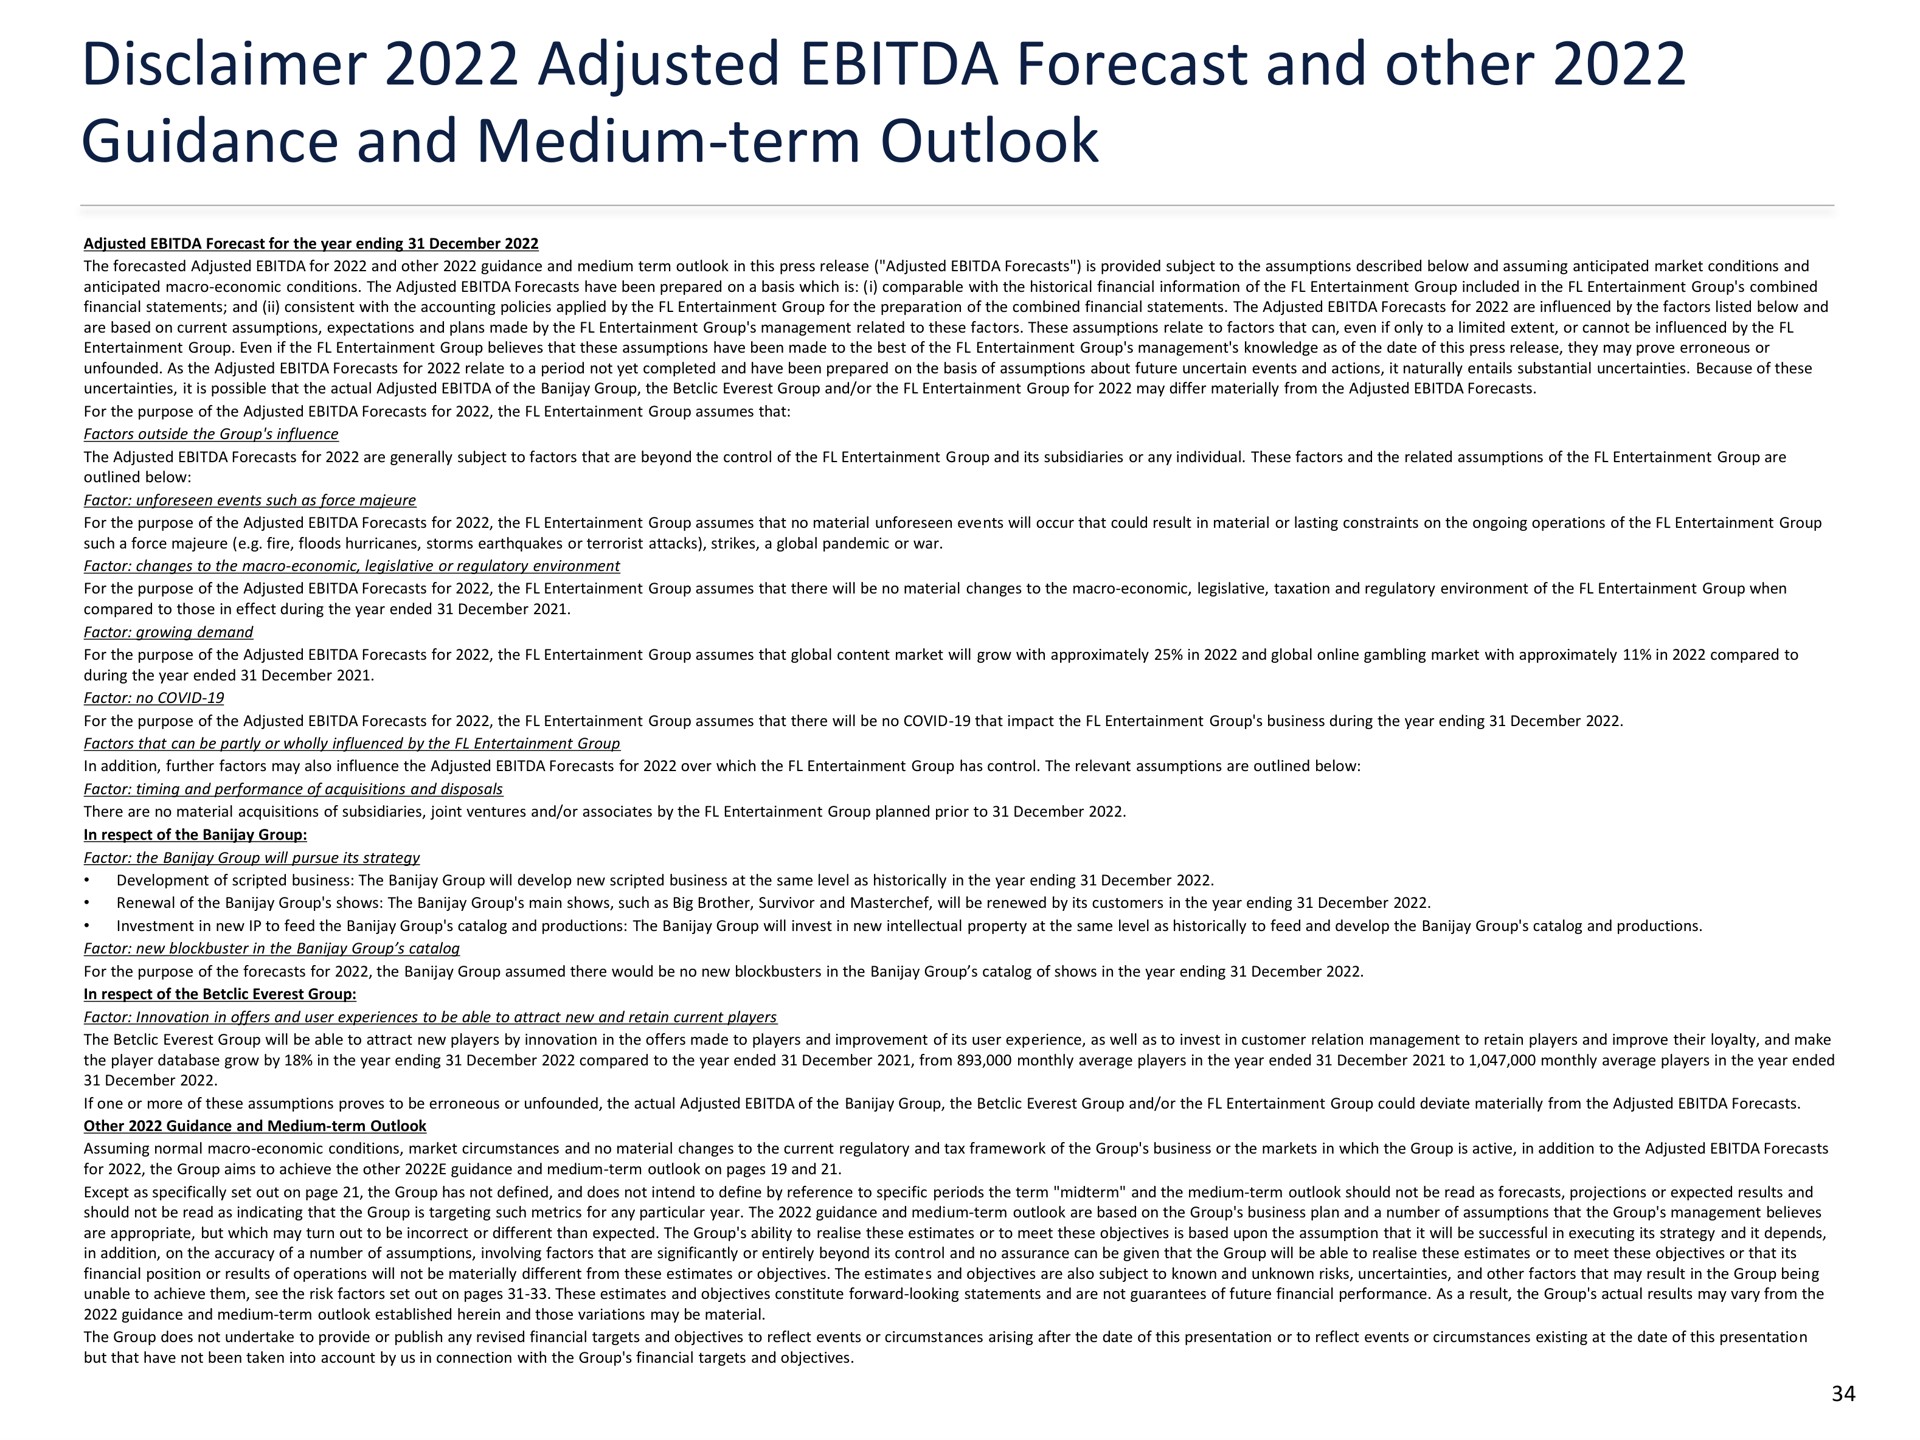 disclaimer adjusted forecast and other guidance and medium term outlook | FL Entertaiment